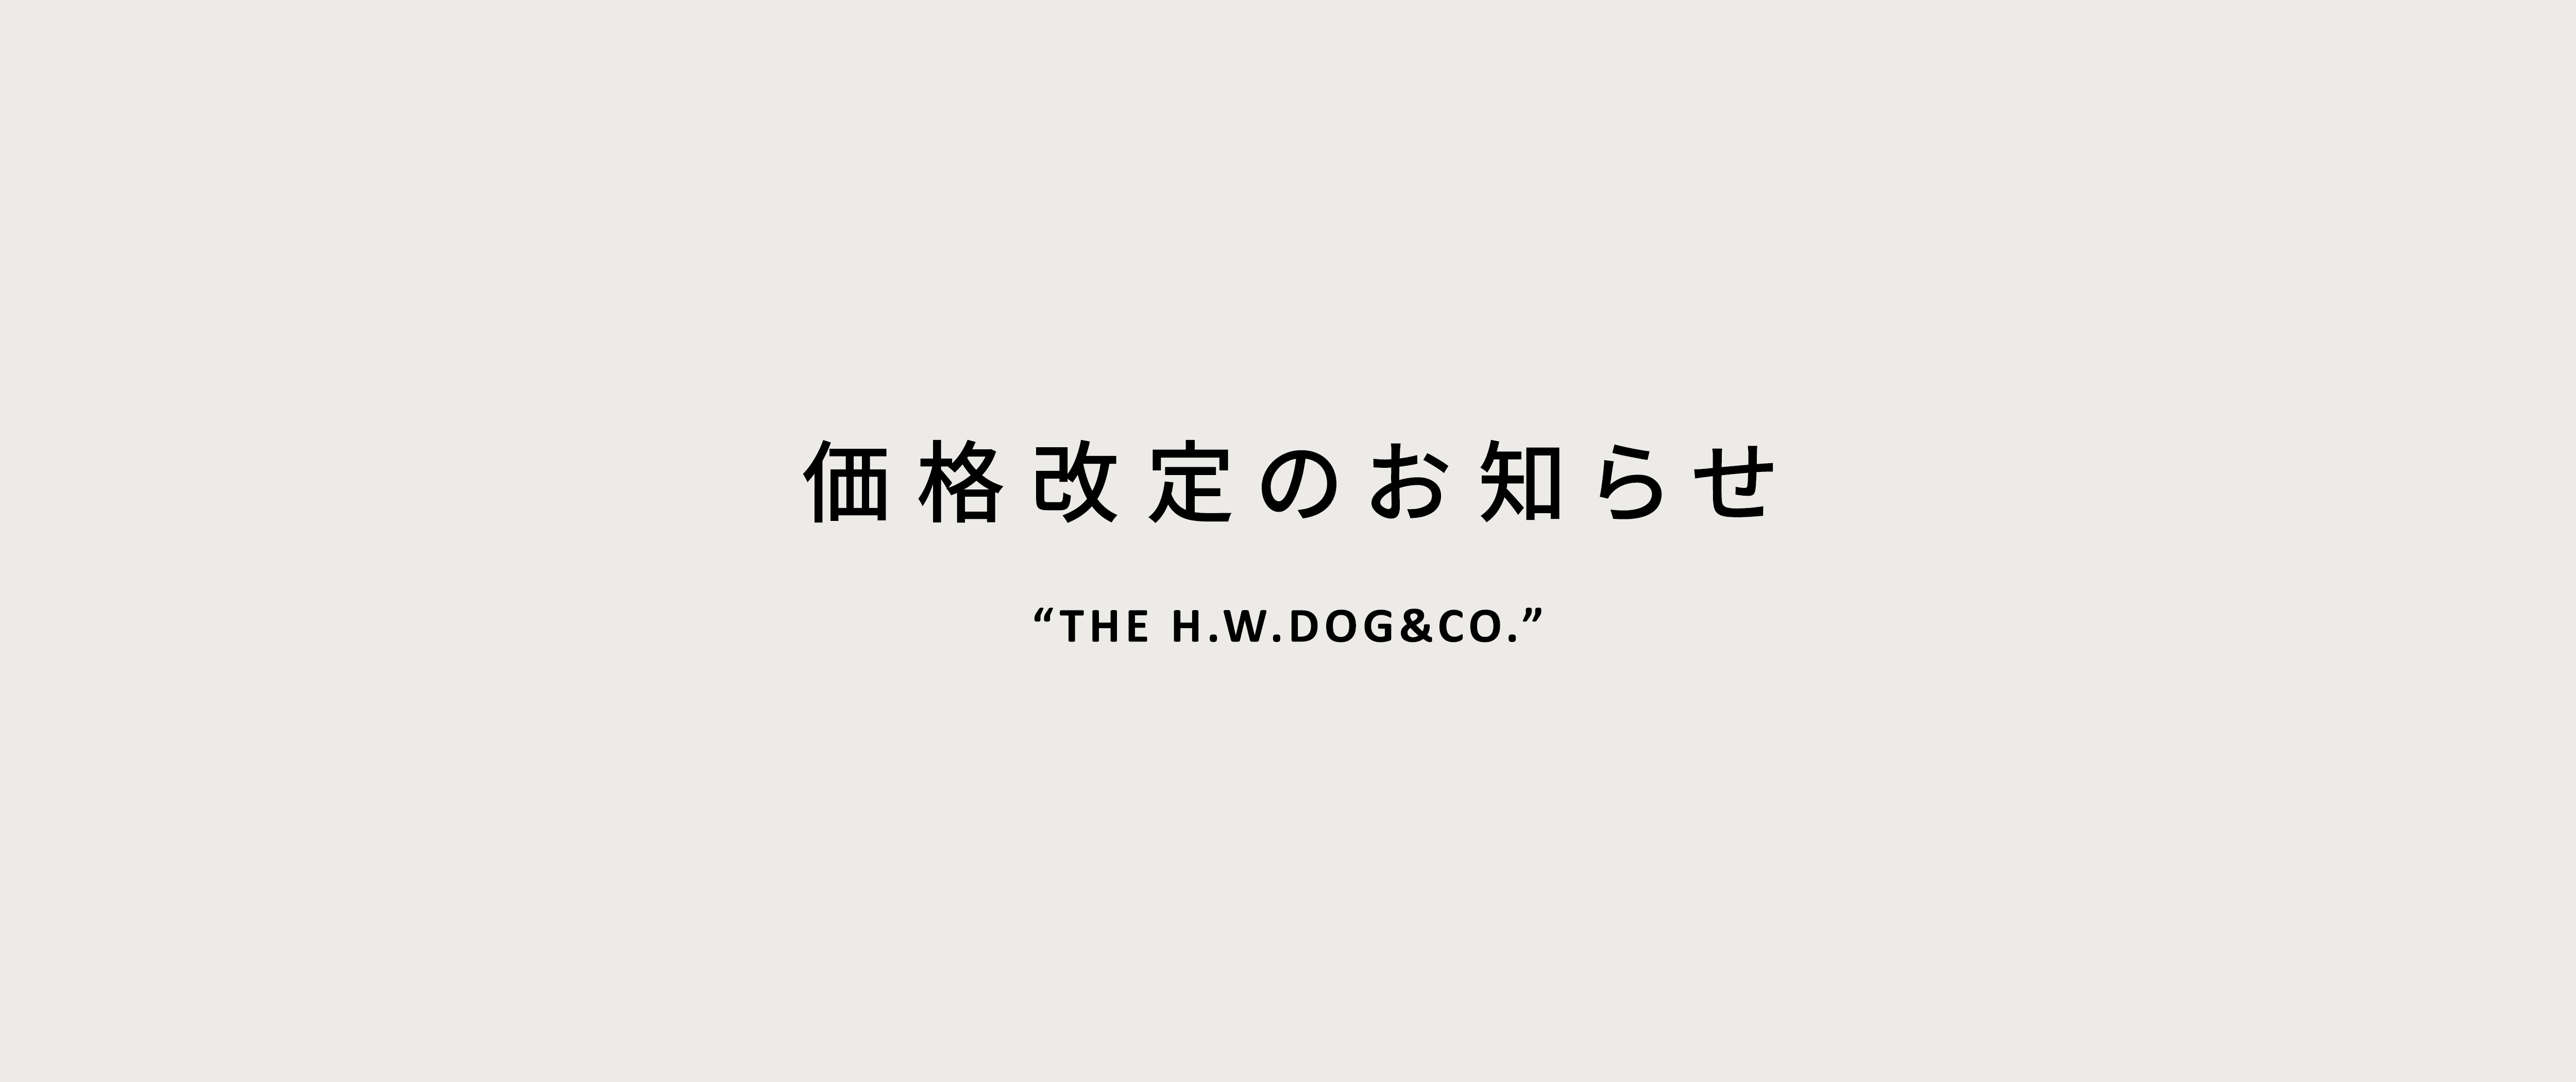 「THE H.W.DOG&CO.」価格改定のお知らせ